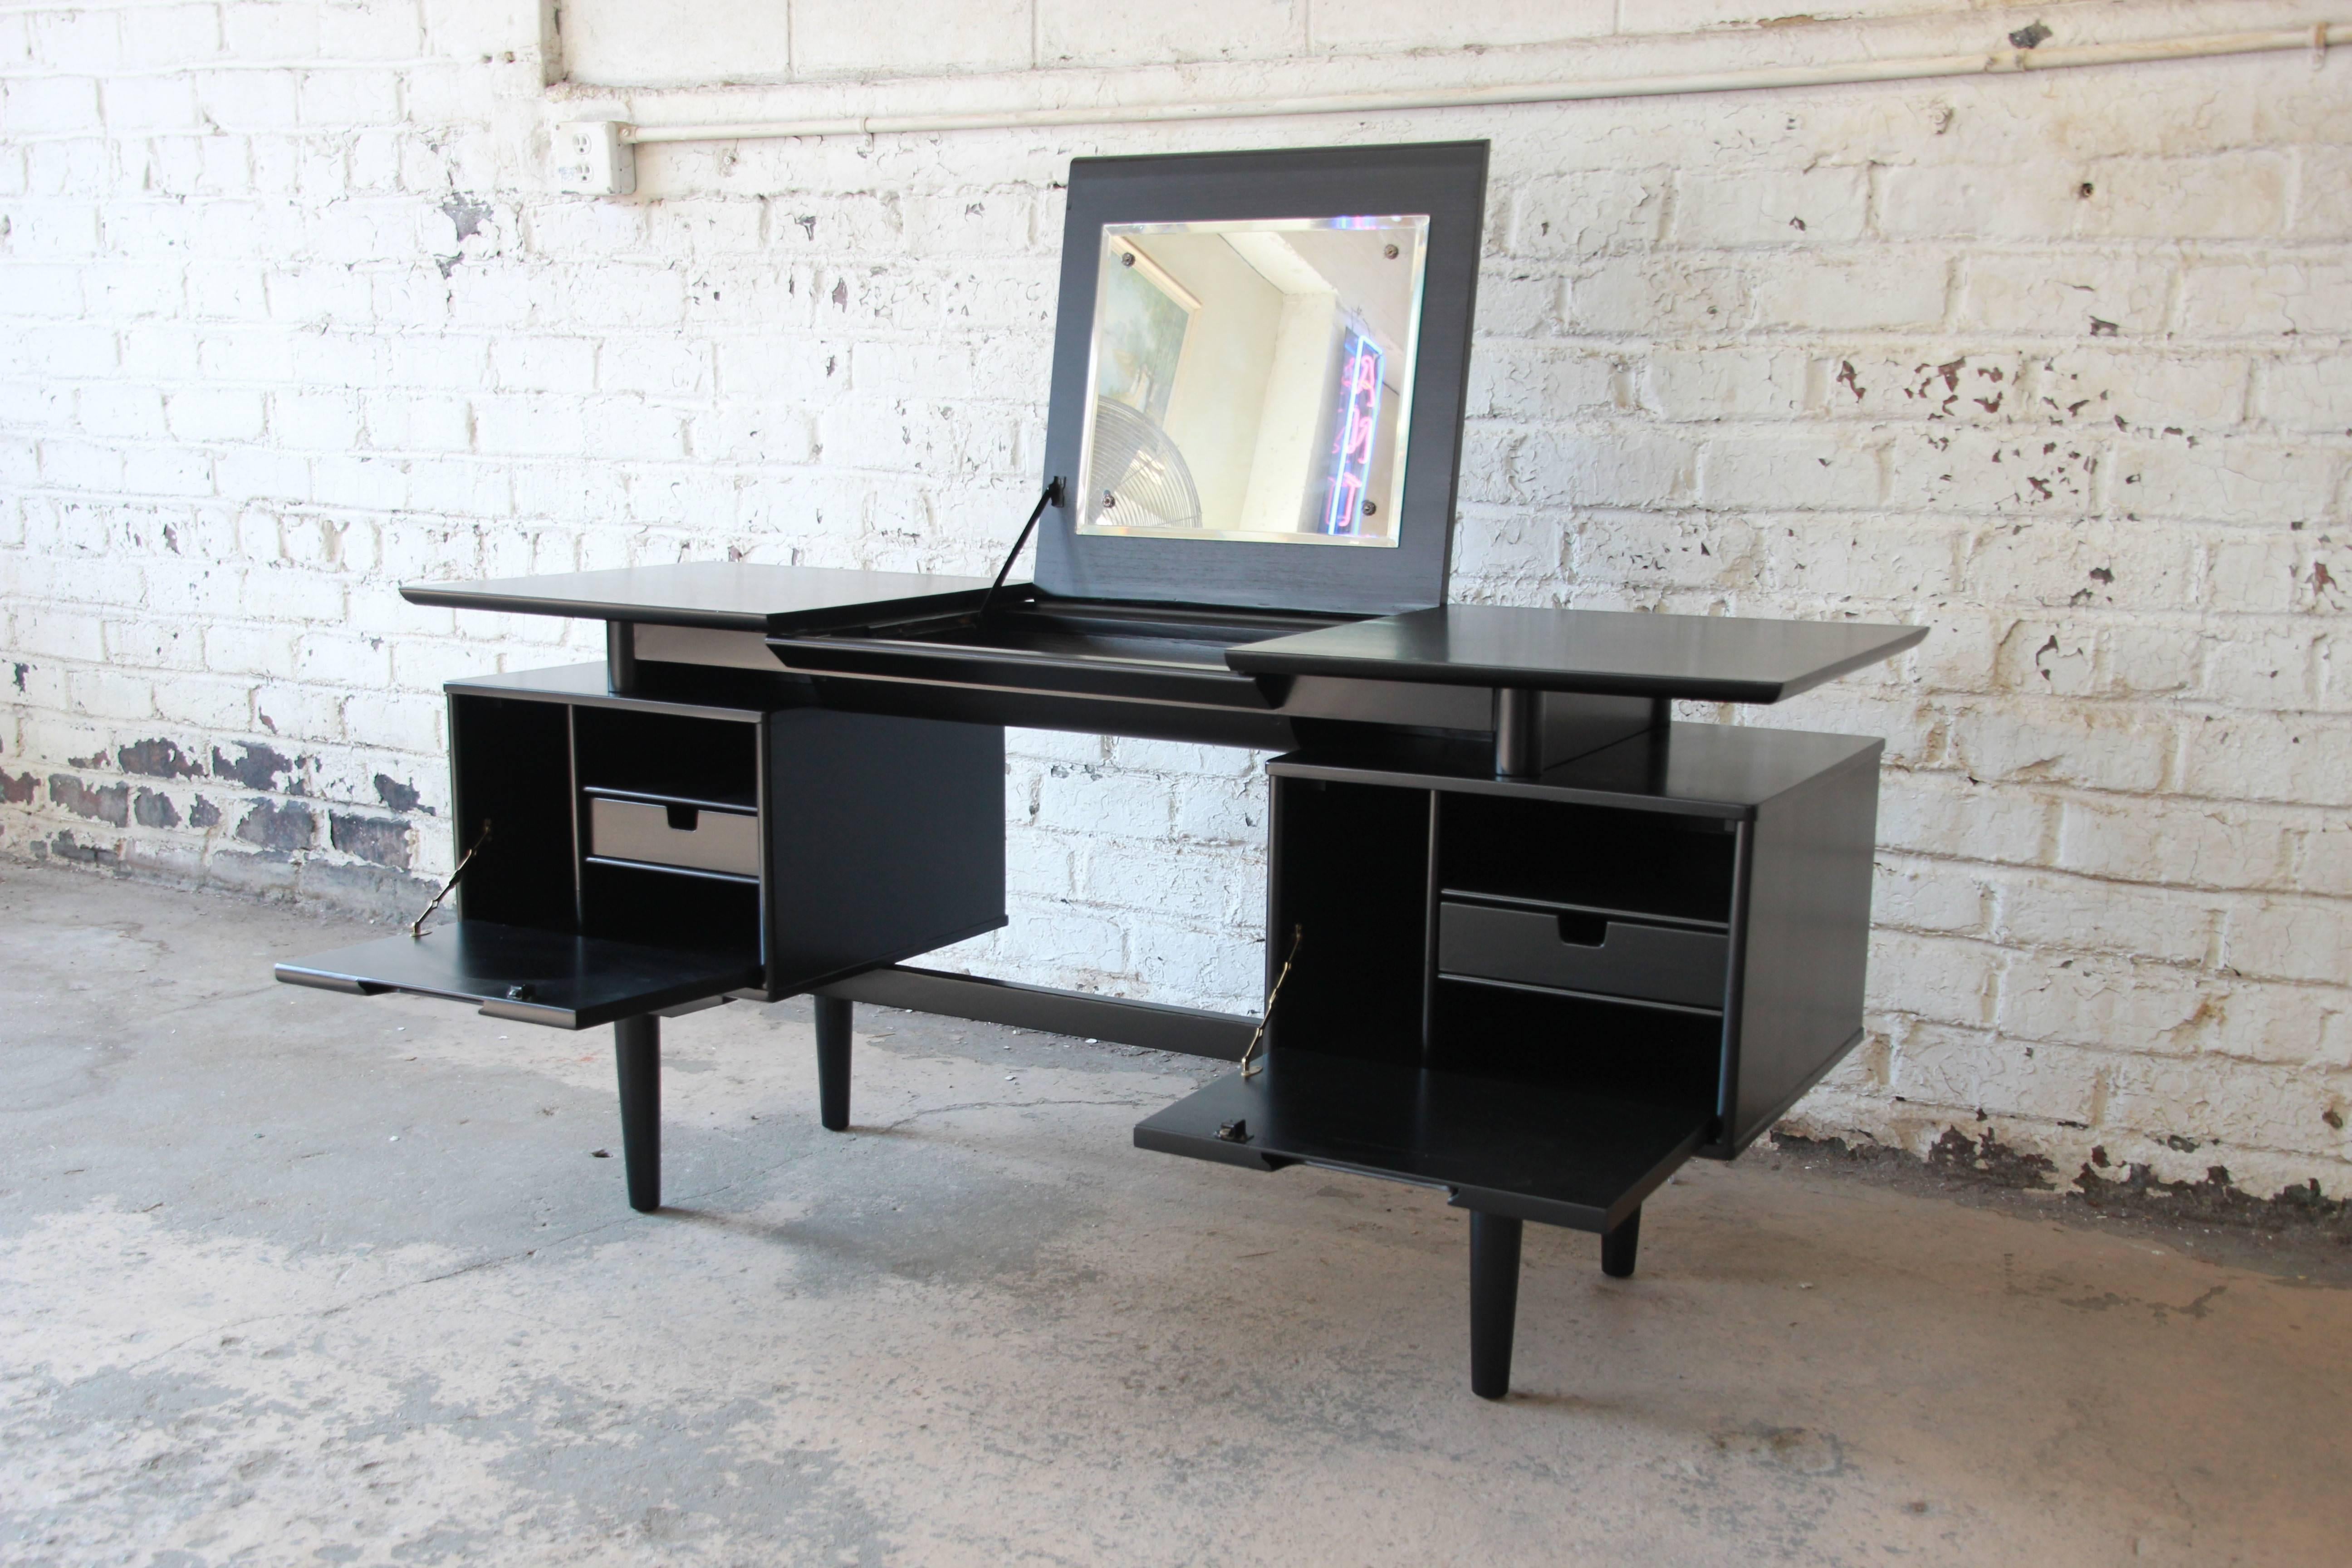 A rare and outstanding Mid-Century Modern floating top vanity desk designed by Milo Baughman for Drexel Furniture. The vanity features a stunning ebonized finish and sleek midcentury design. The rectangular top sits above two fitted compartments